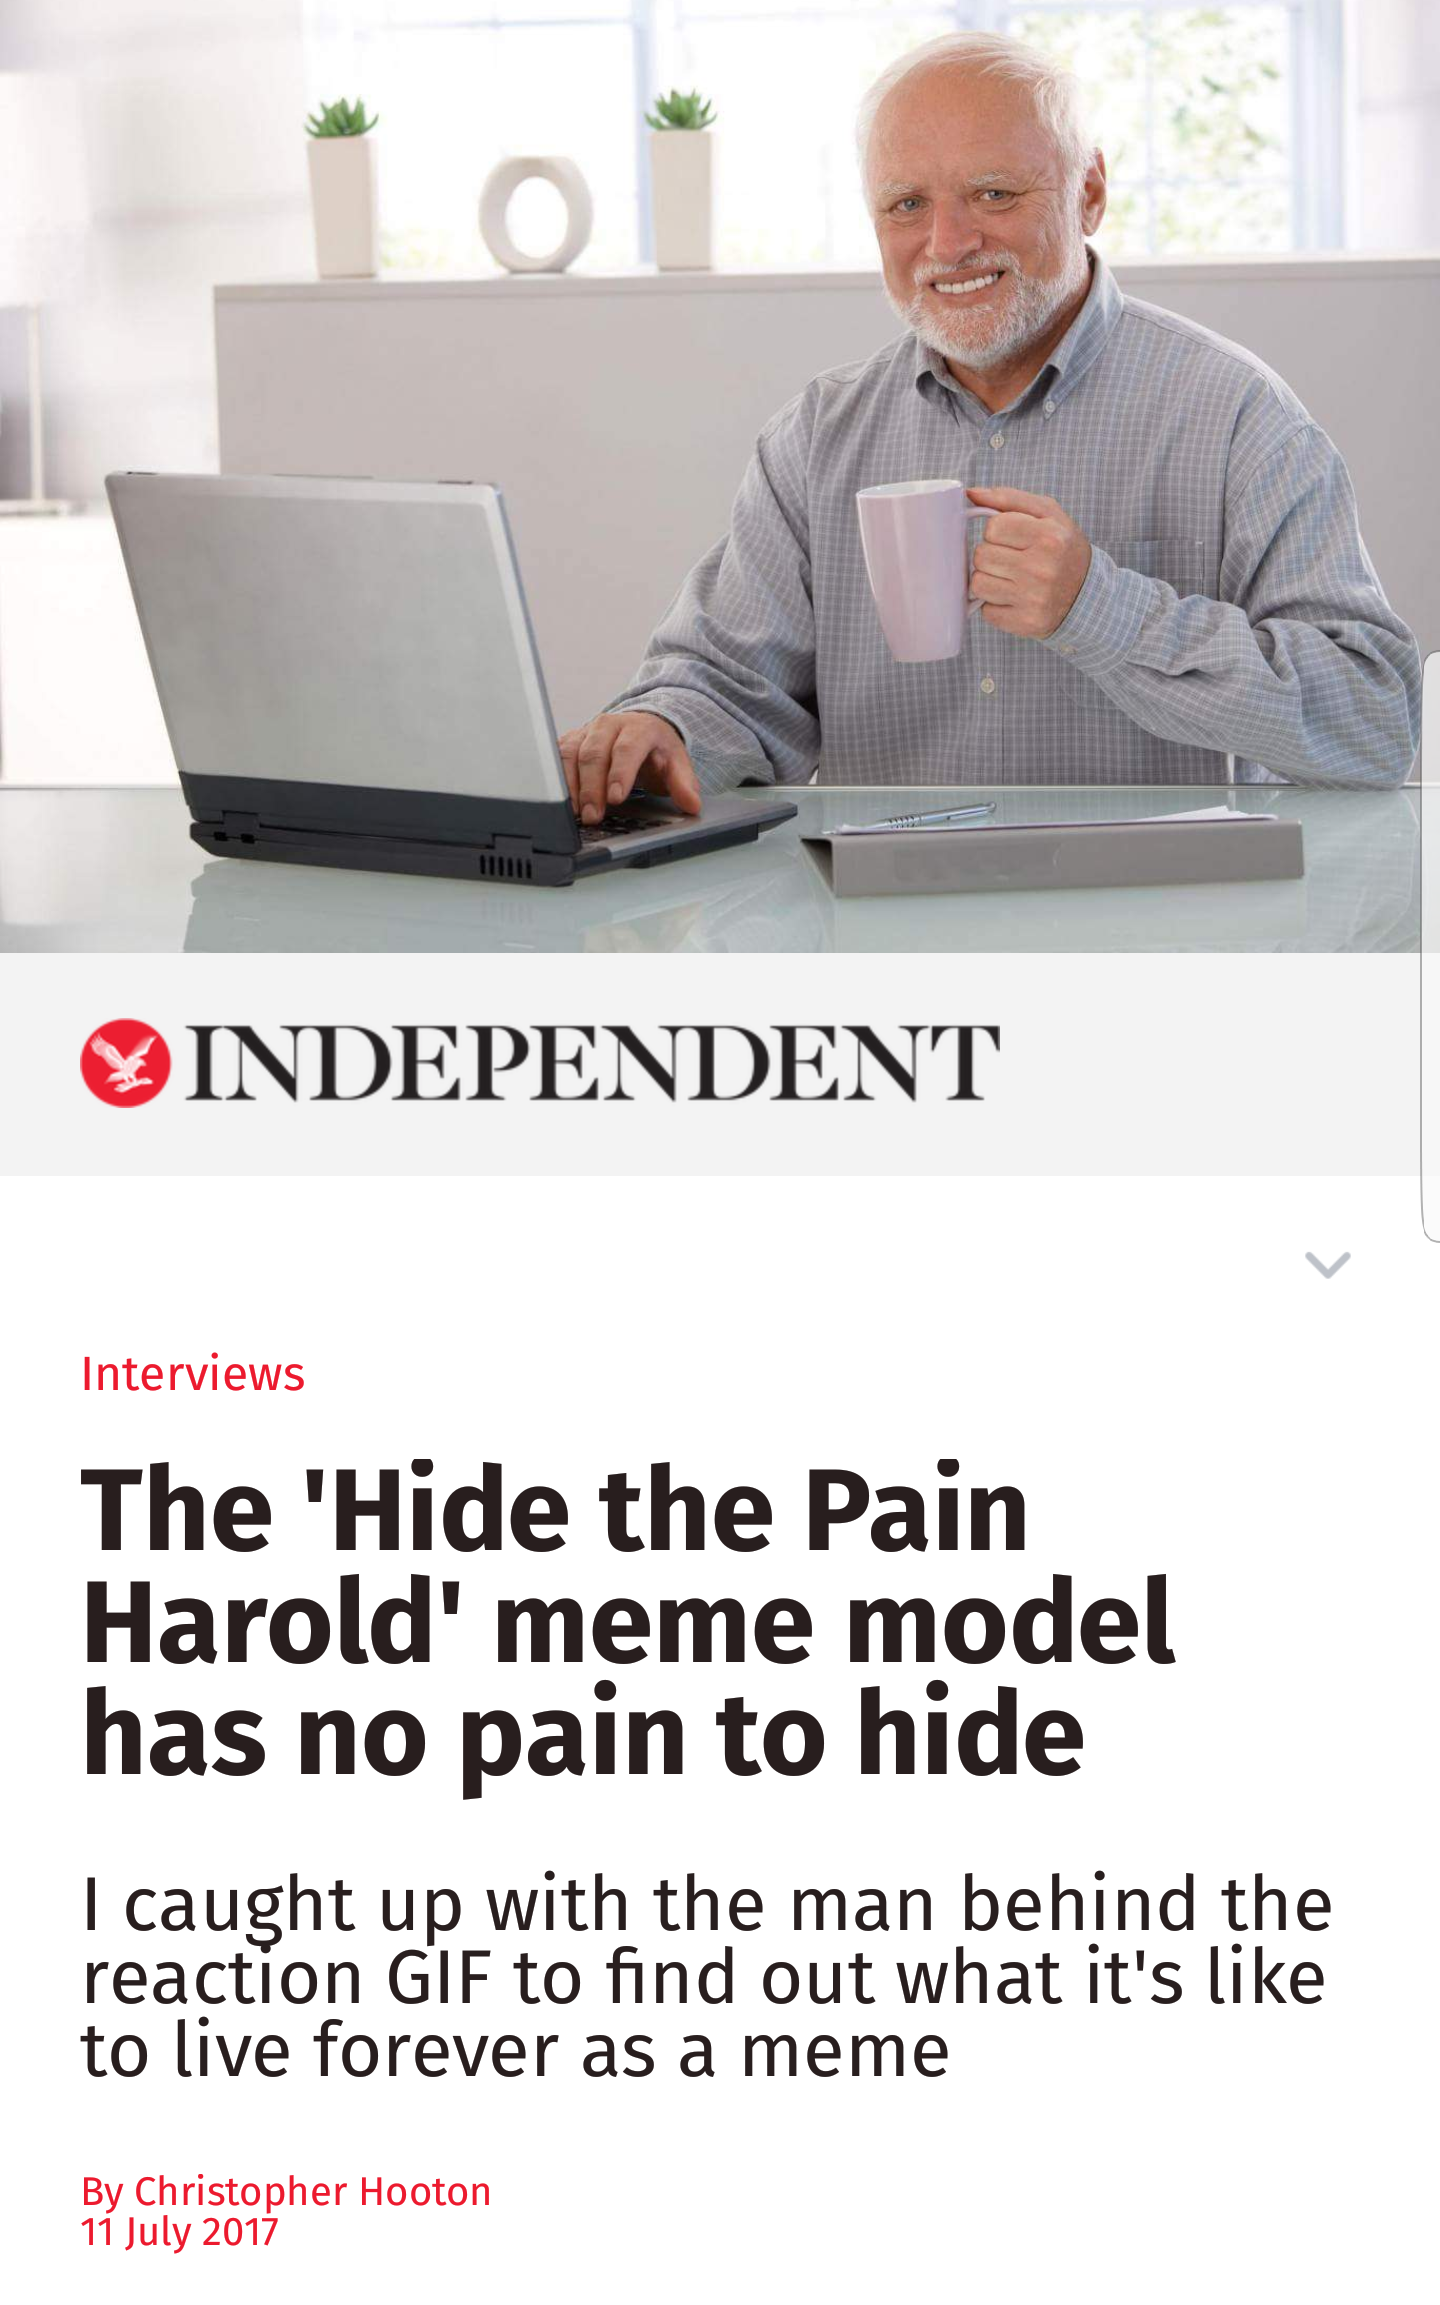 hide the pain harold meme - 10 Independent Interviews The 'Hide the Pain Harold' meme model has no pain to hide I caught up with the man behind the reaction Gif to find out what it's to live forever as a meme ay Christopher Haston